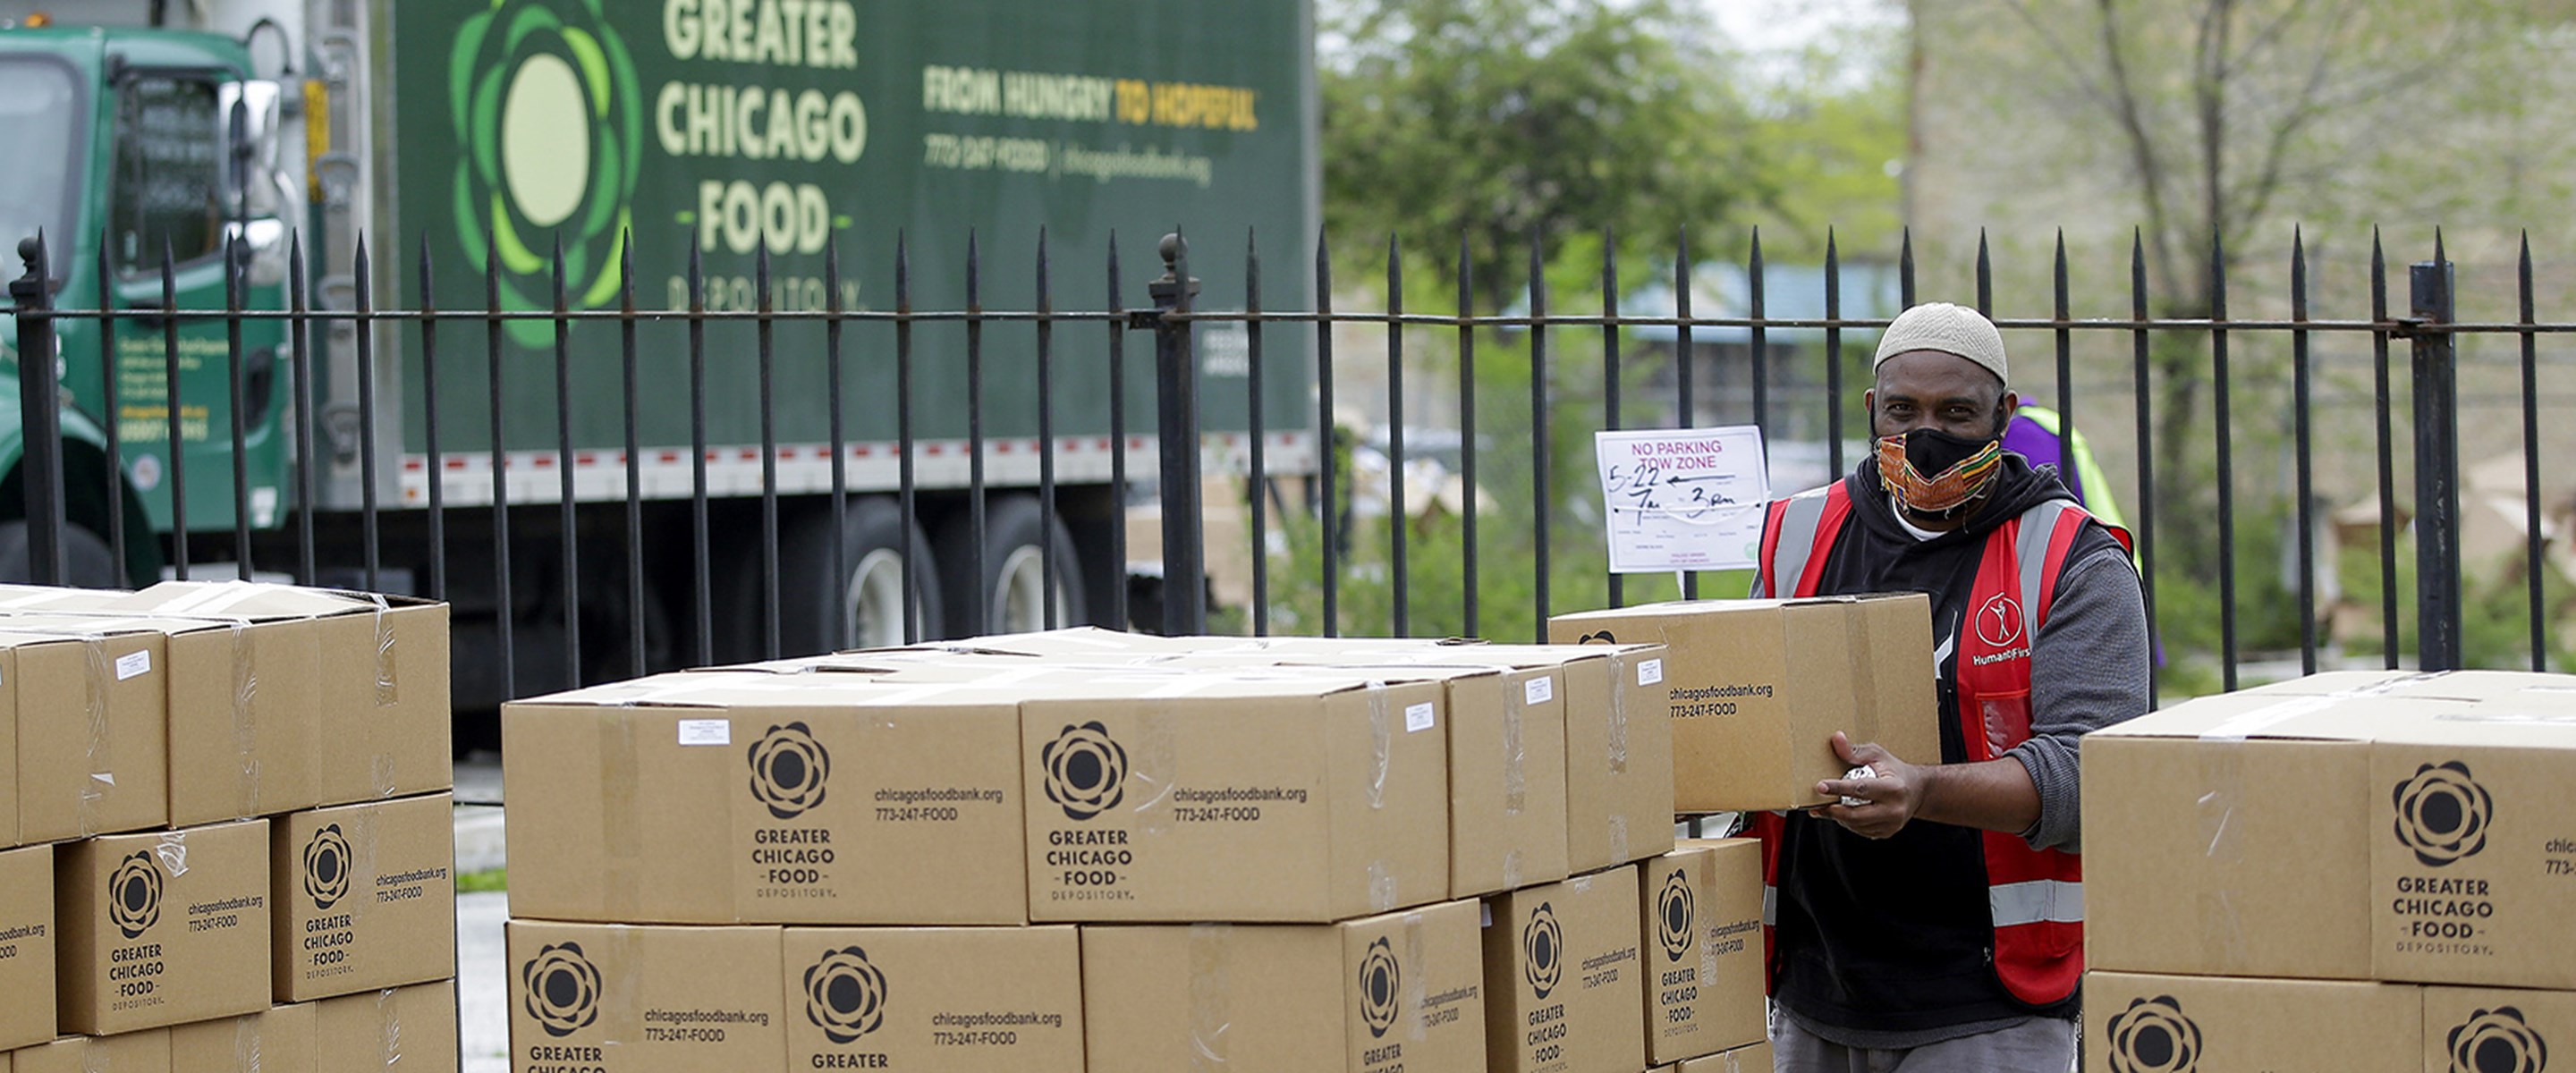 A worker stacking boxes next to a Greater Chicago Food Depository truck